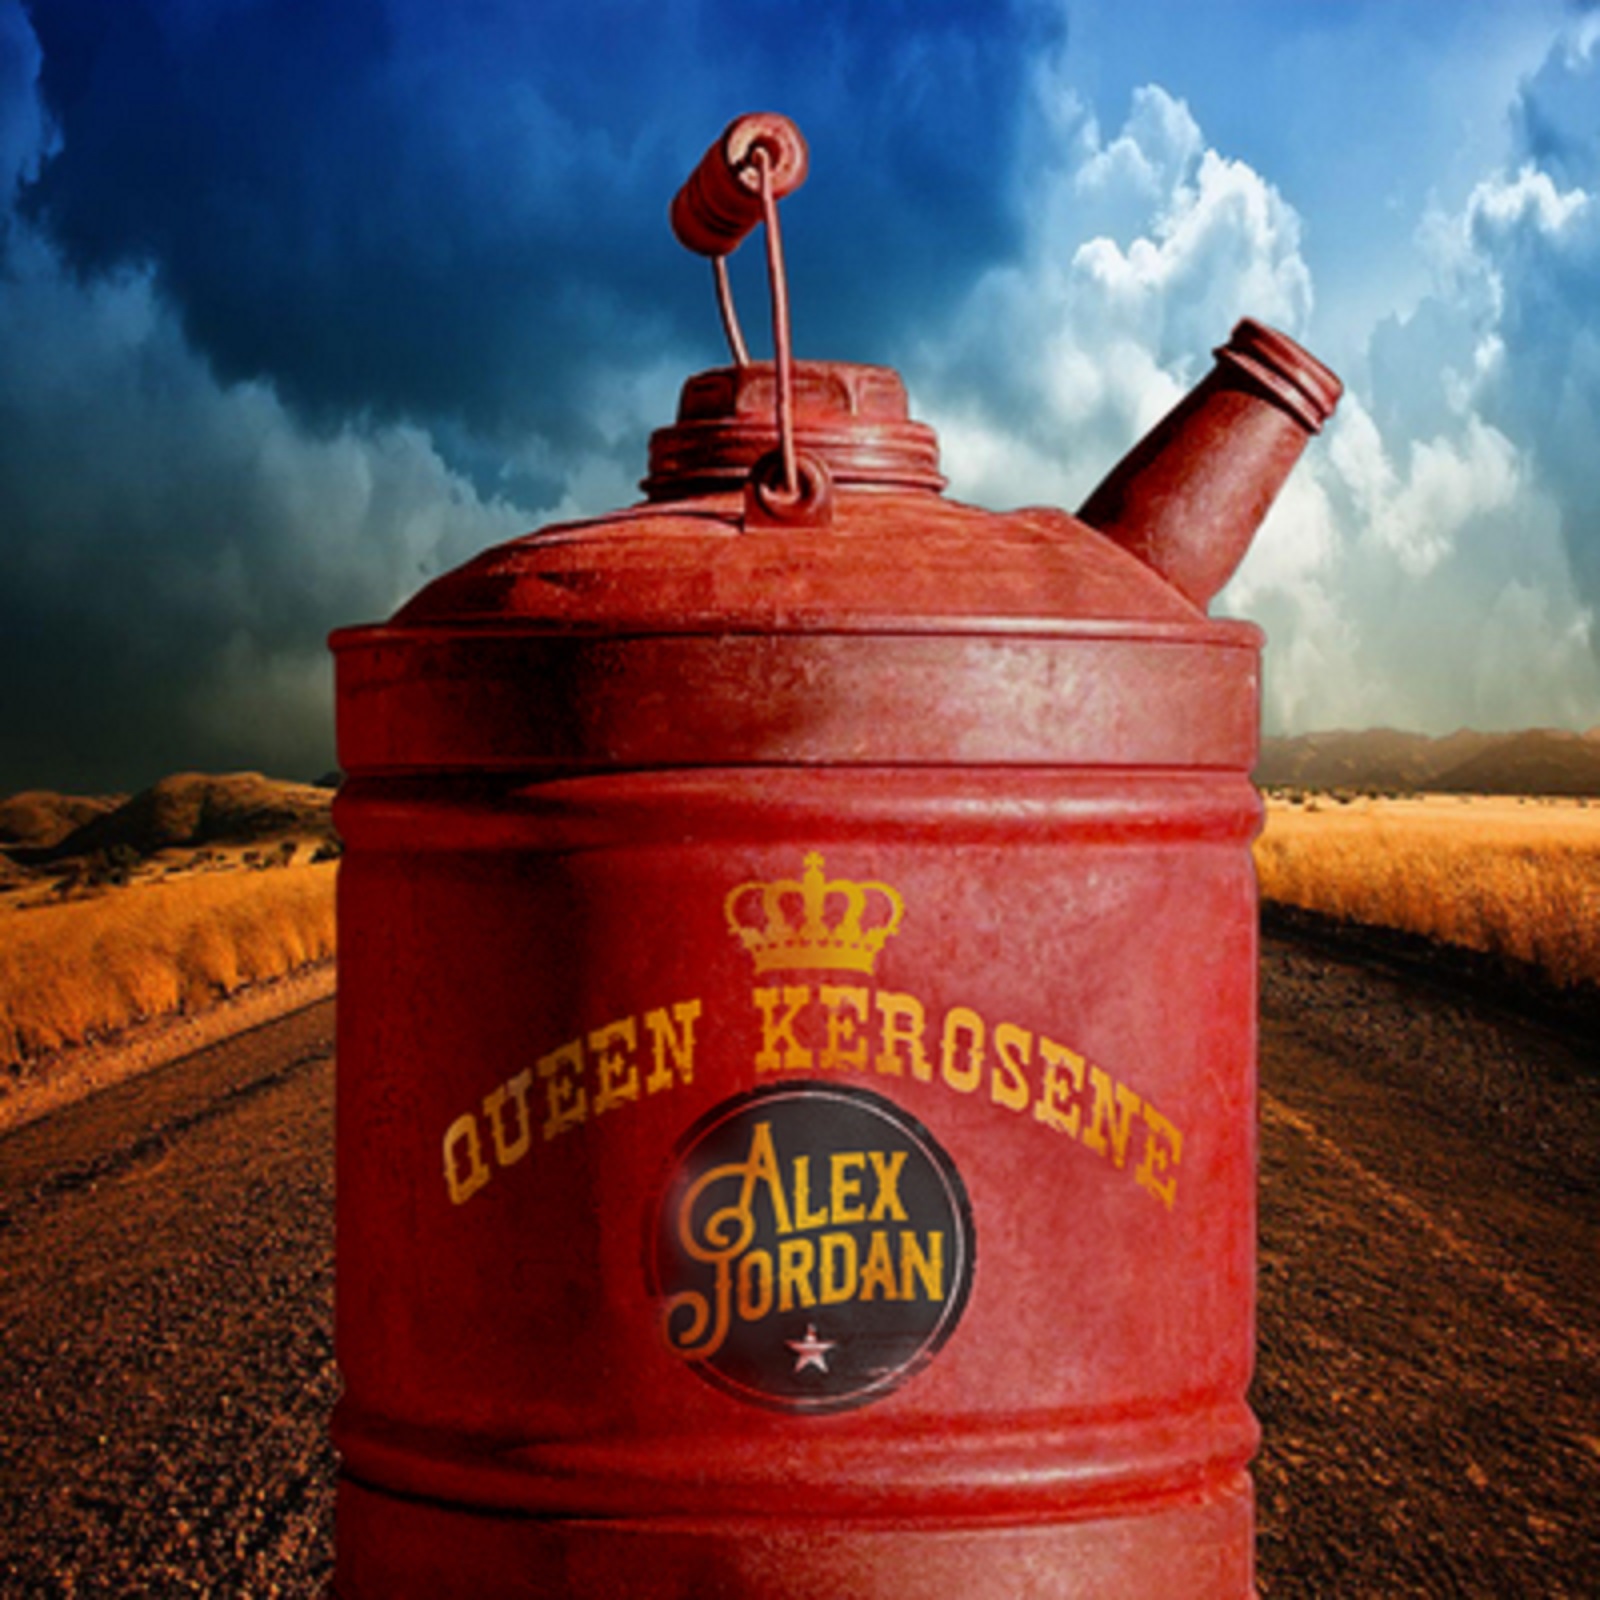 Musical Swiss Army Knife Alex Jordan Comes Into His Own On New Album  Queen Kerosene, Produced by  Steve Berlin of Los Lobos, Out March 8